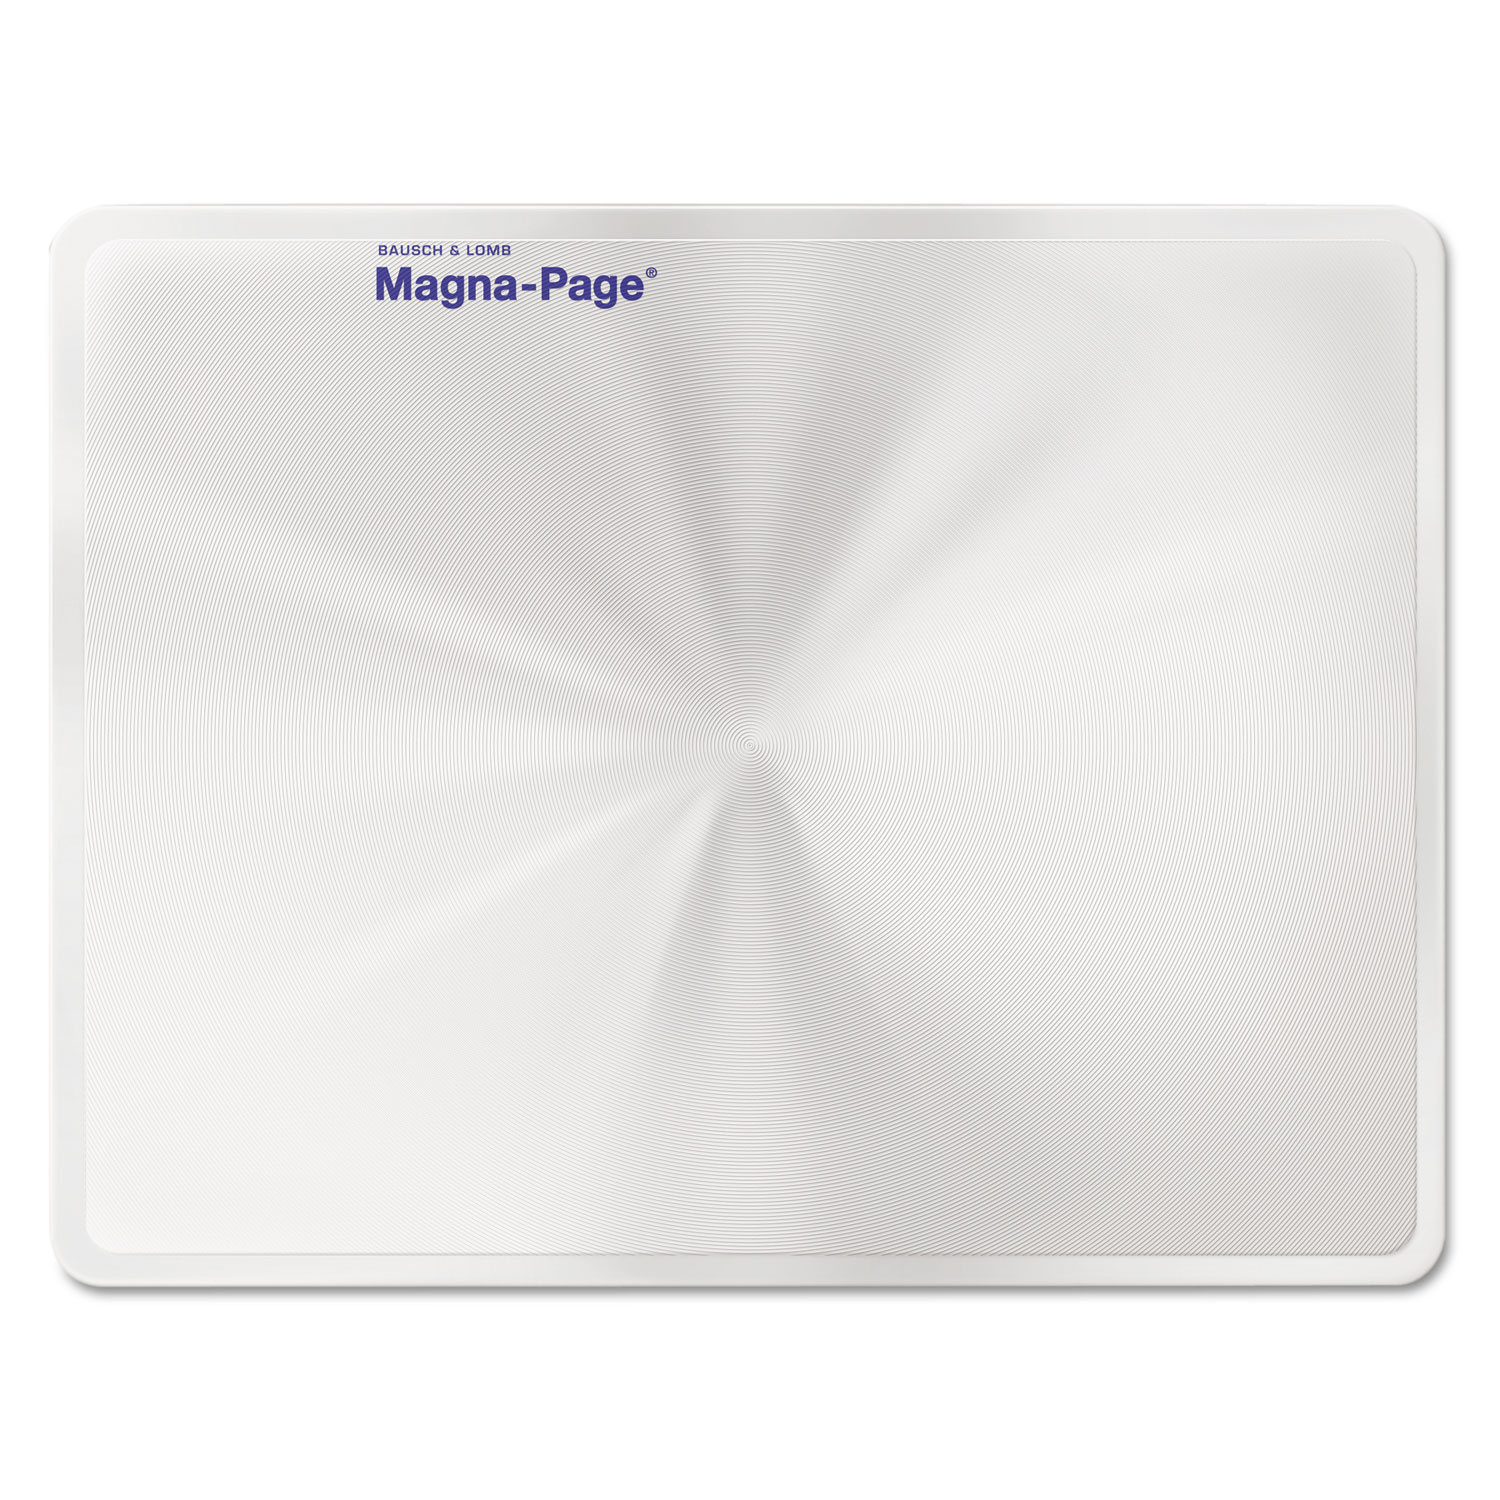  Bausch & Lomb 81-90-07 2X Magna-Page Full-Page Magnifier w/Molded Fresnel Lens, 8 1/4 x 10 3/4 (BAL819007) 